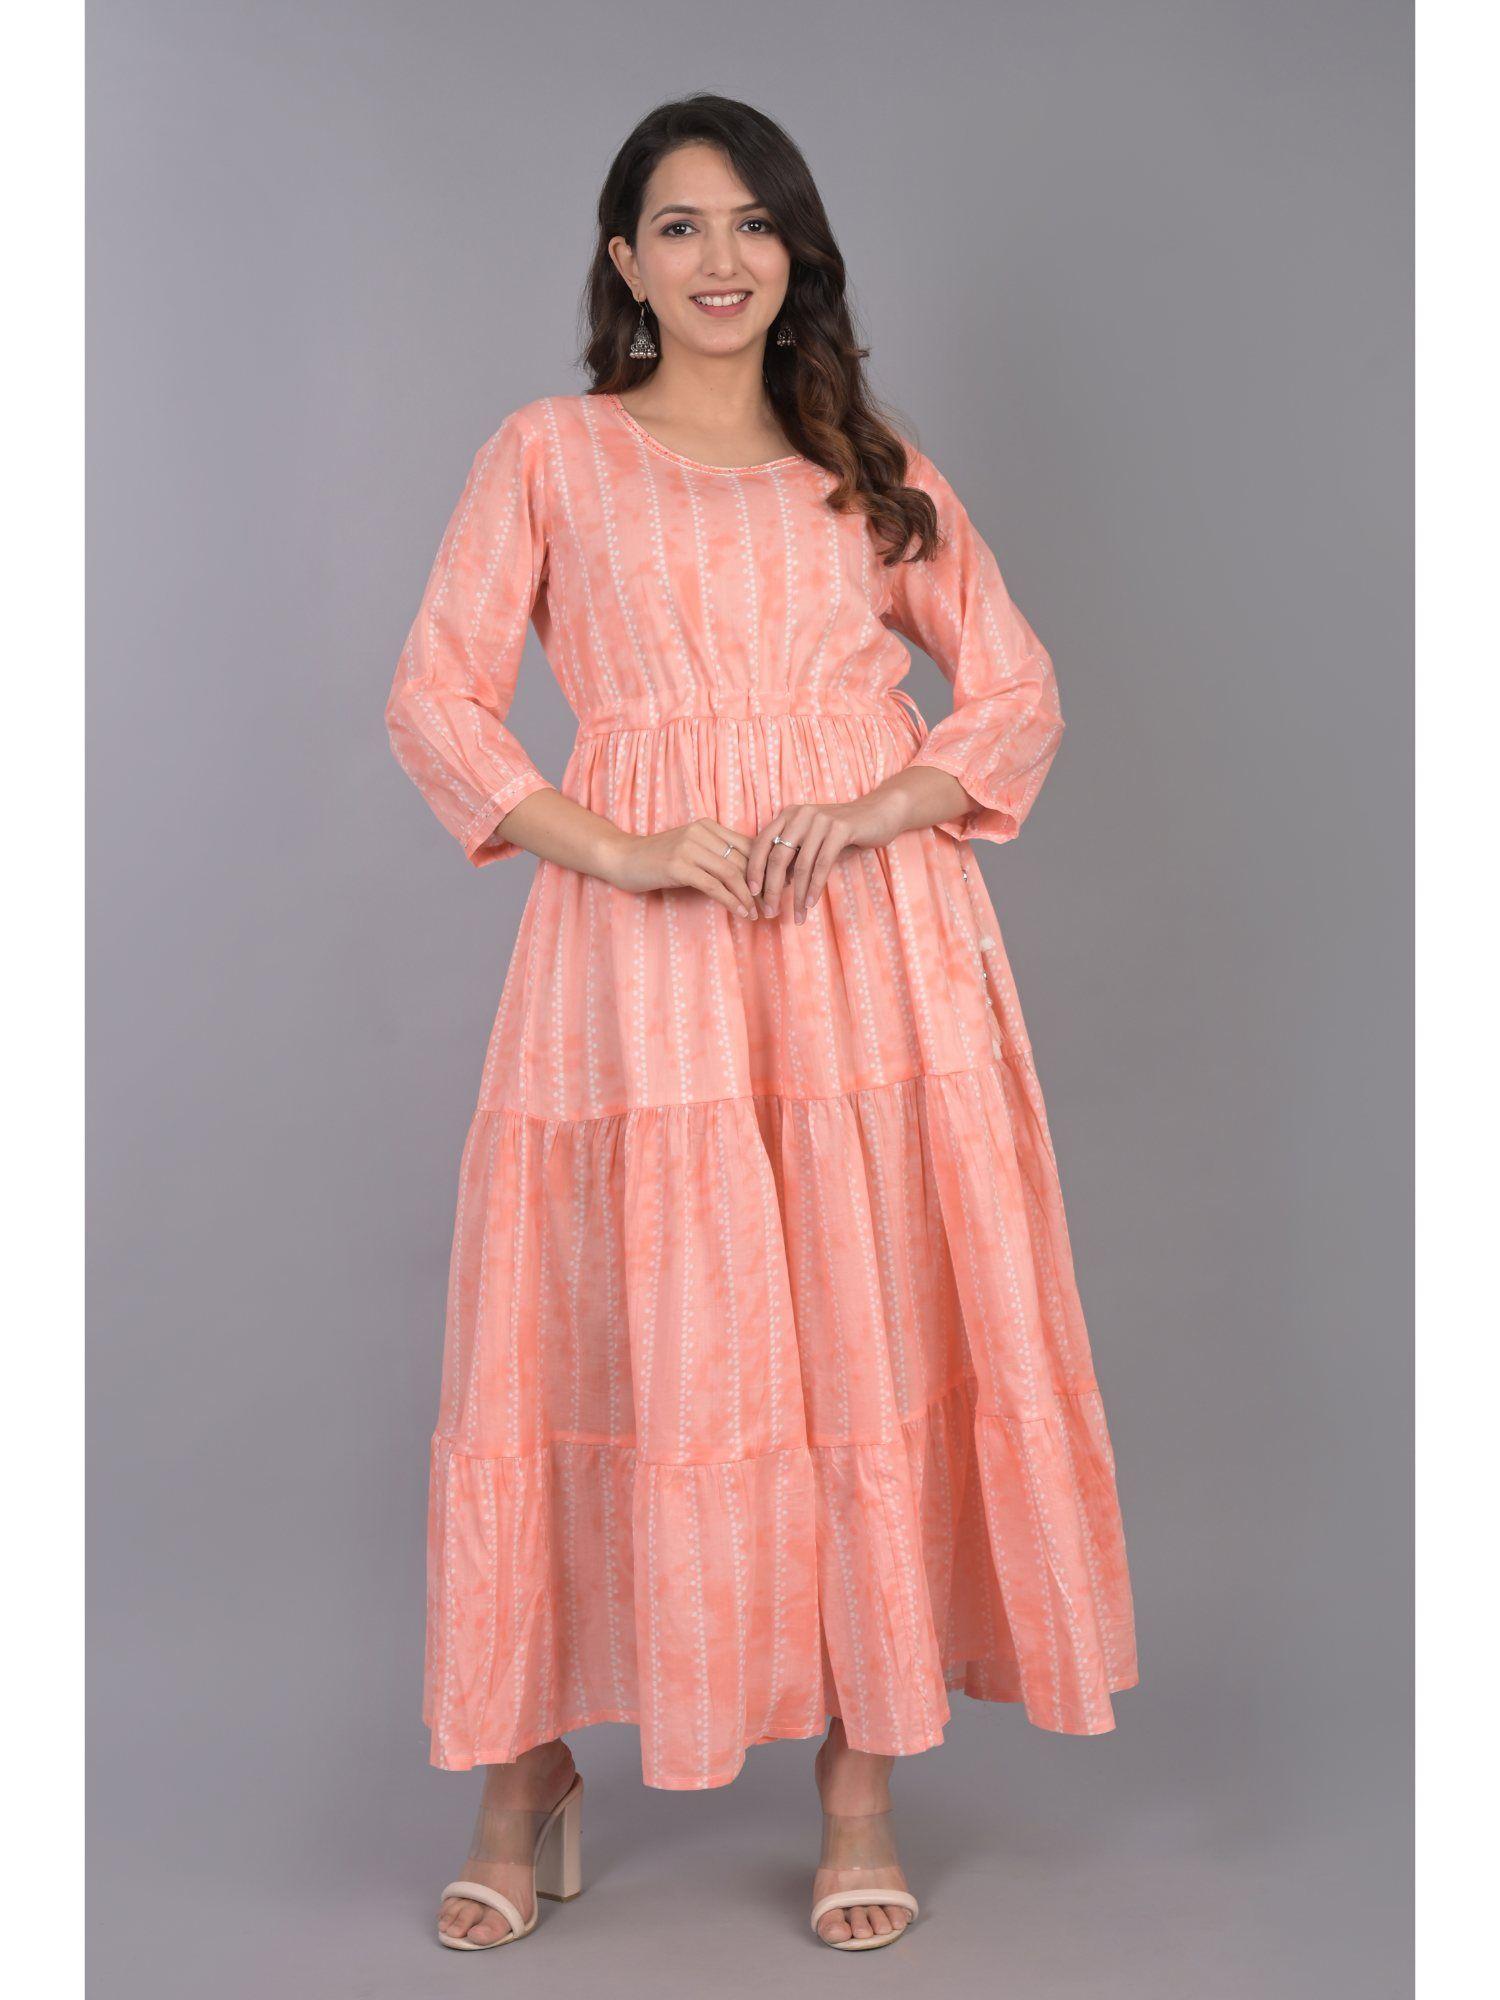 cotton 3 tier pink flared dress